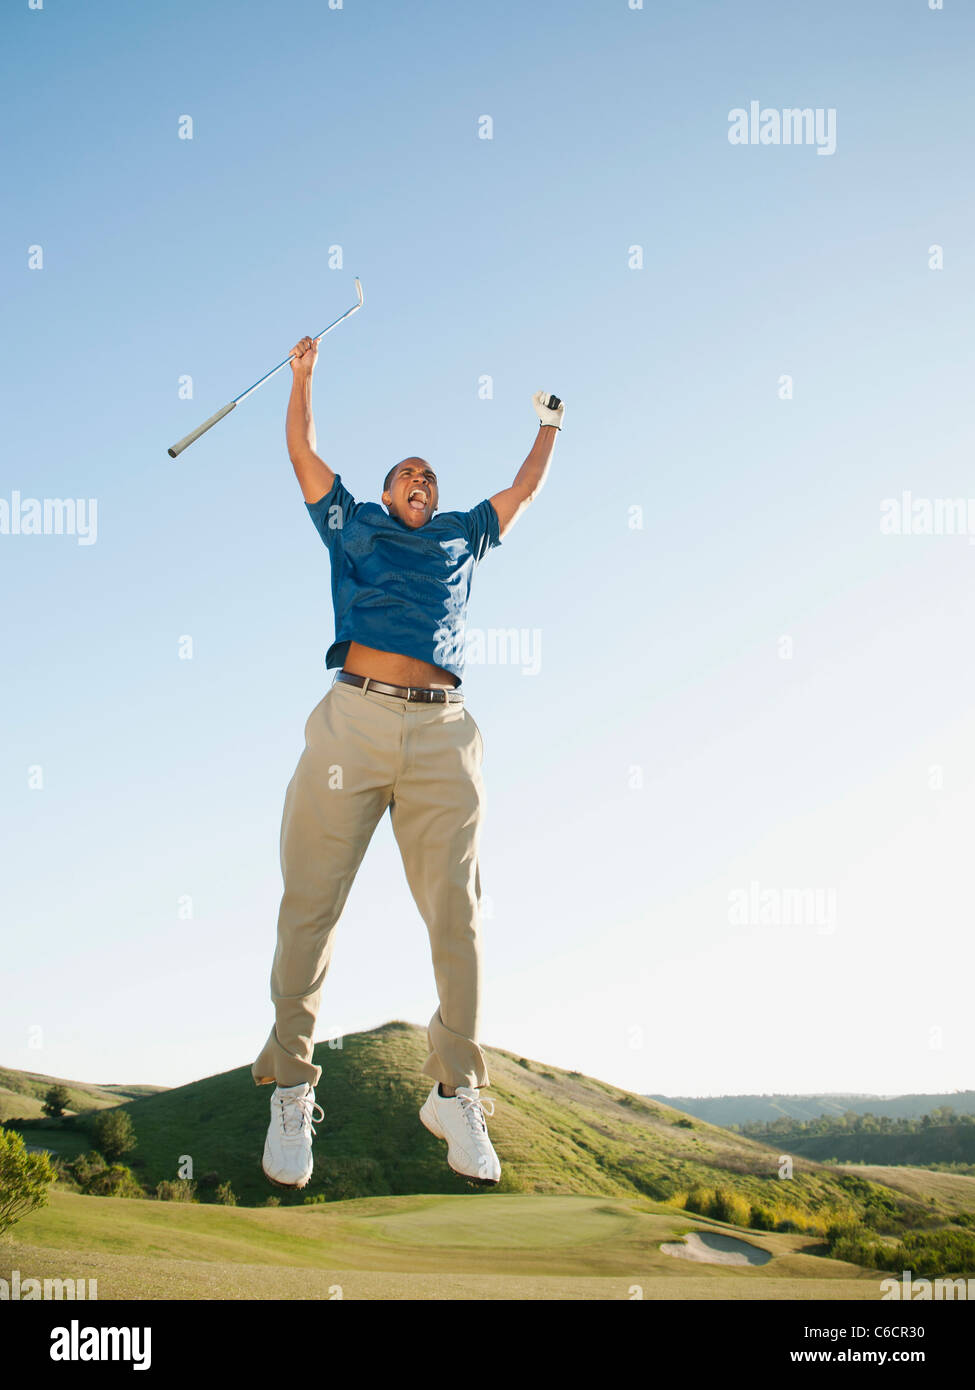 Excited Black golfer jumping in mid-air on golf course Stock Photo